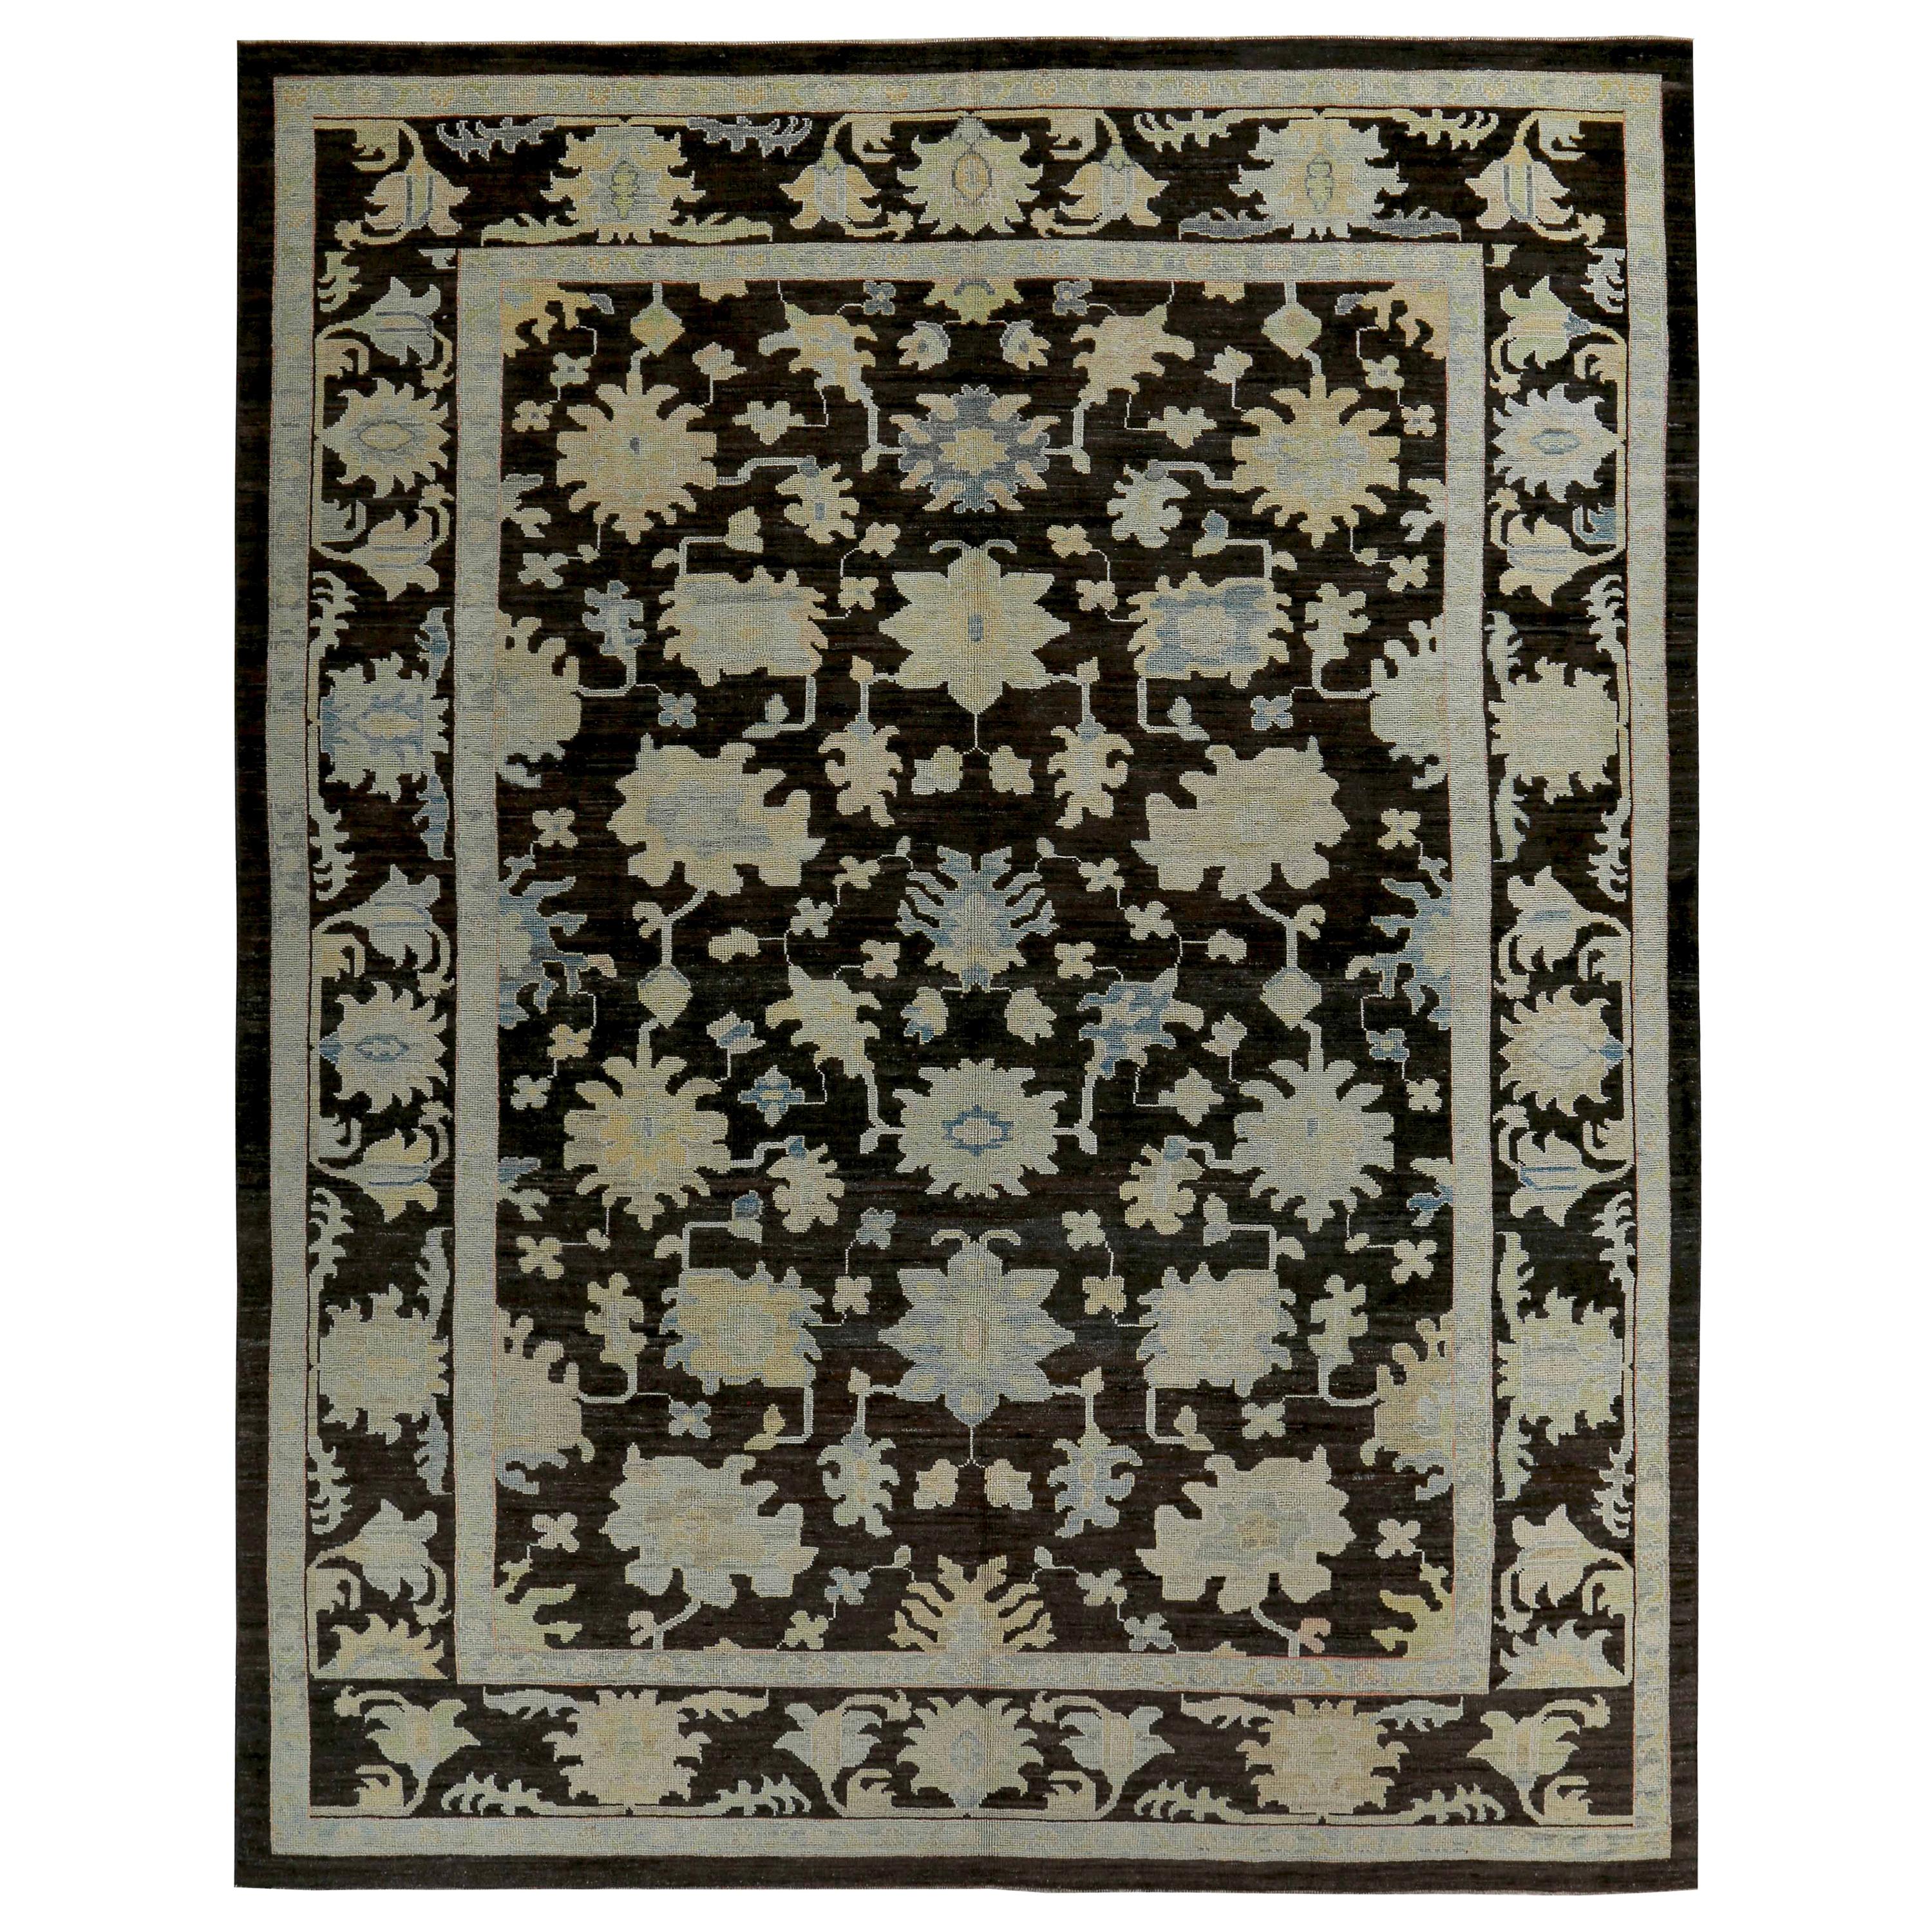 Turkish Oushak Rug with Blue and Beige Floral Details on Dark Brown Field